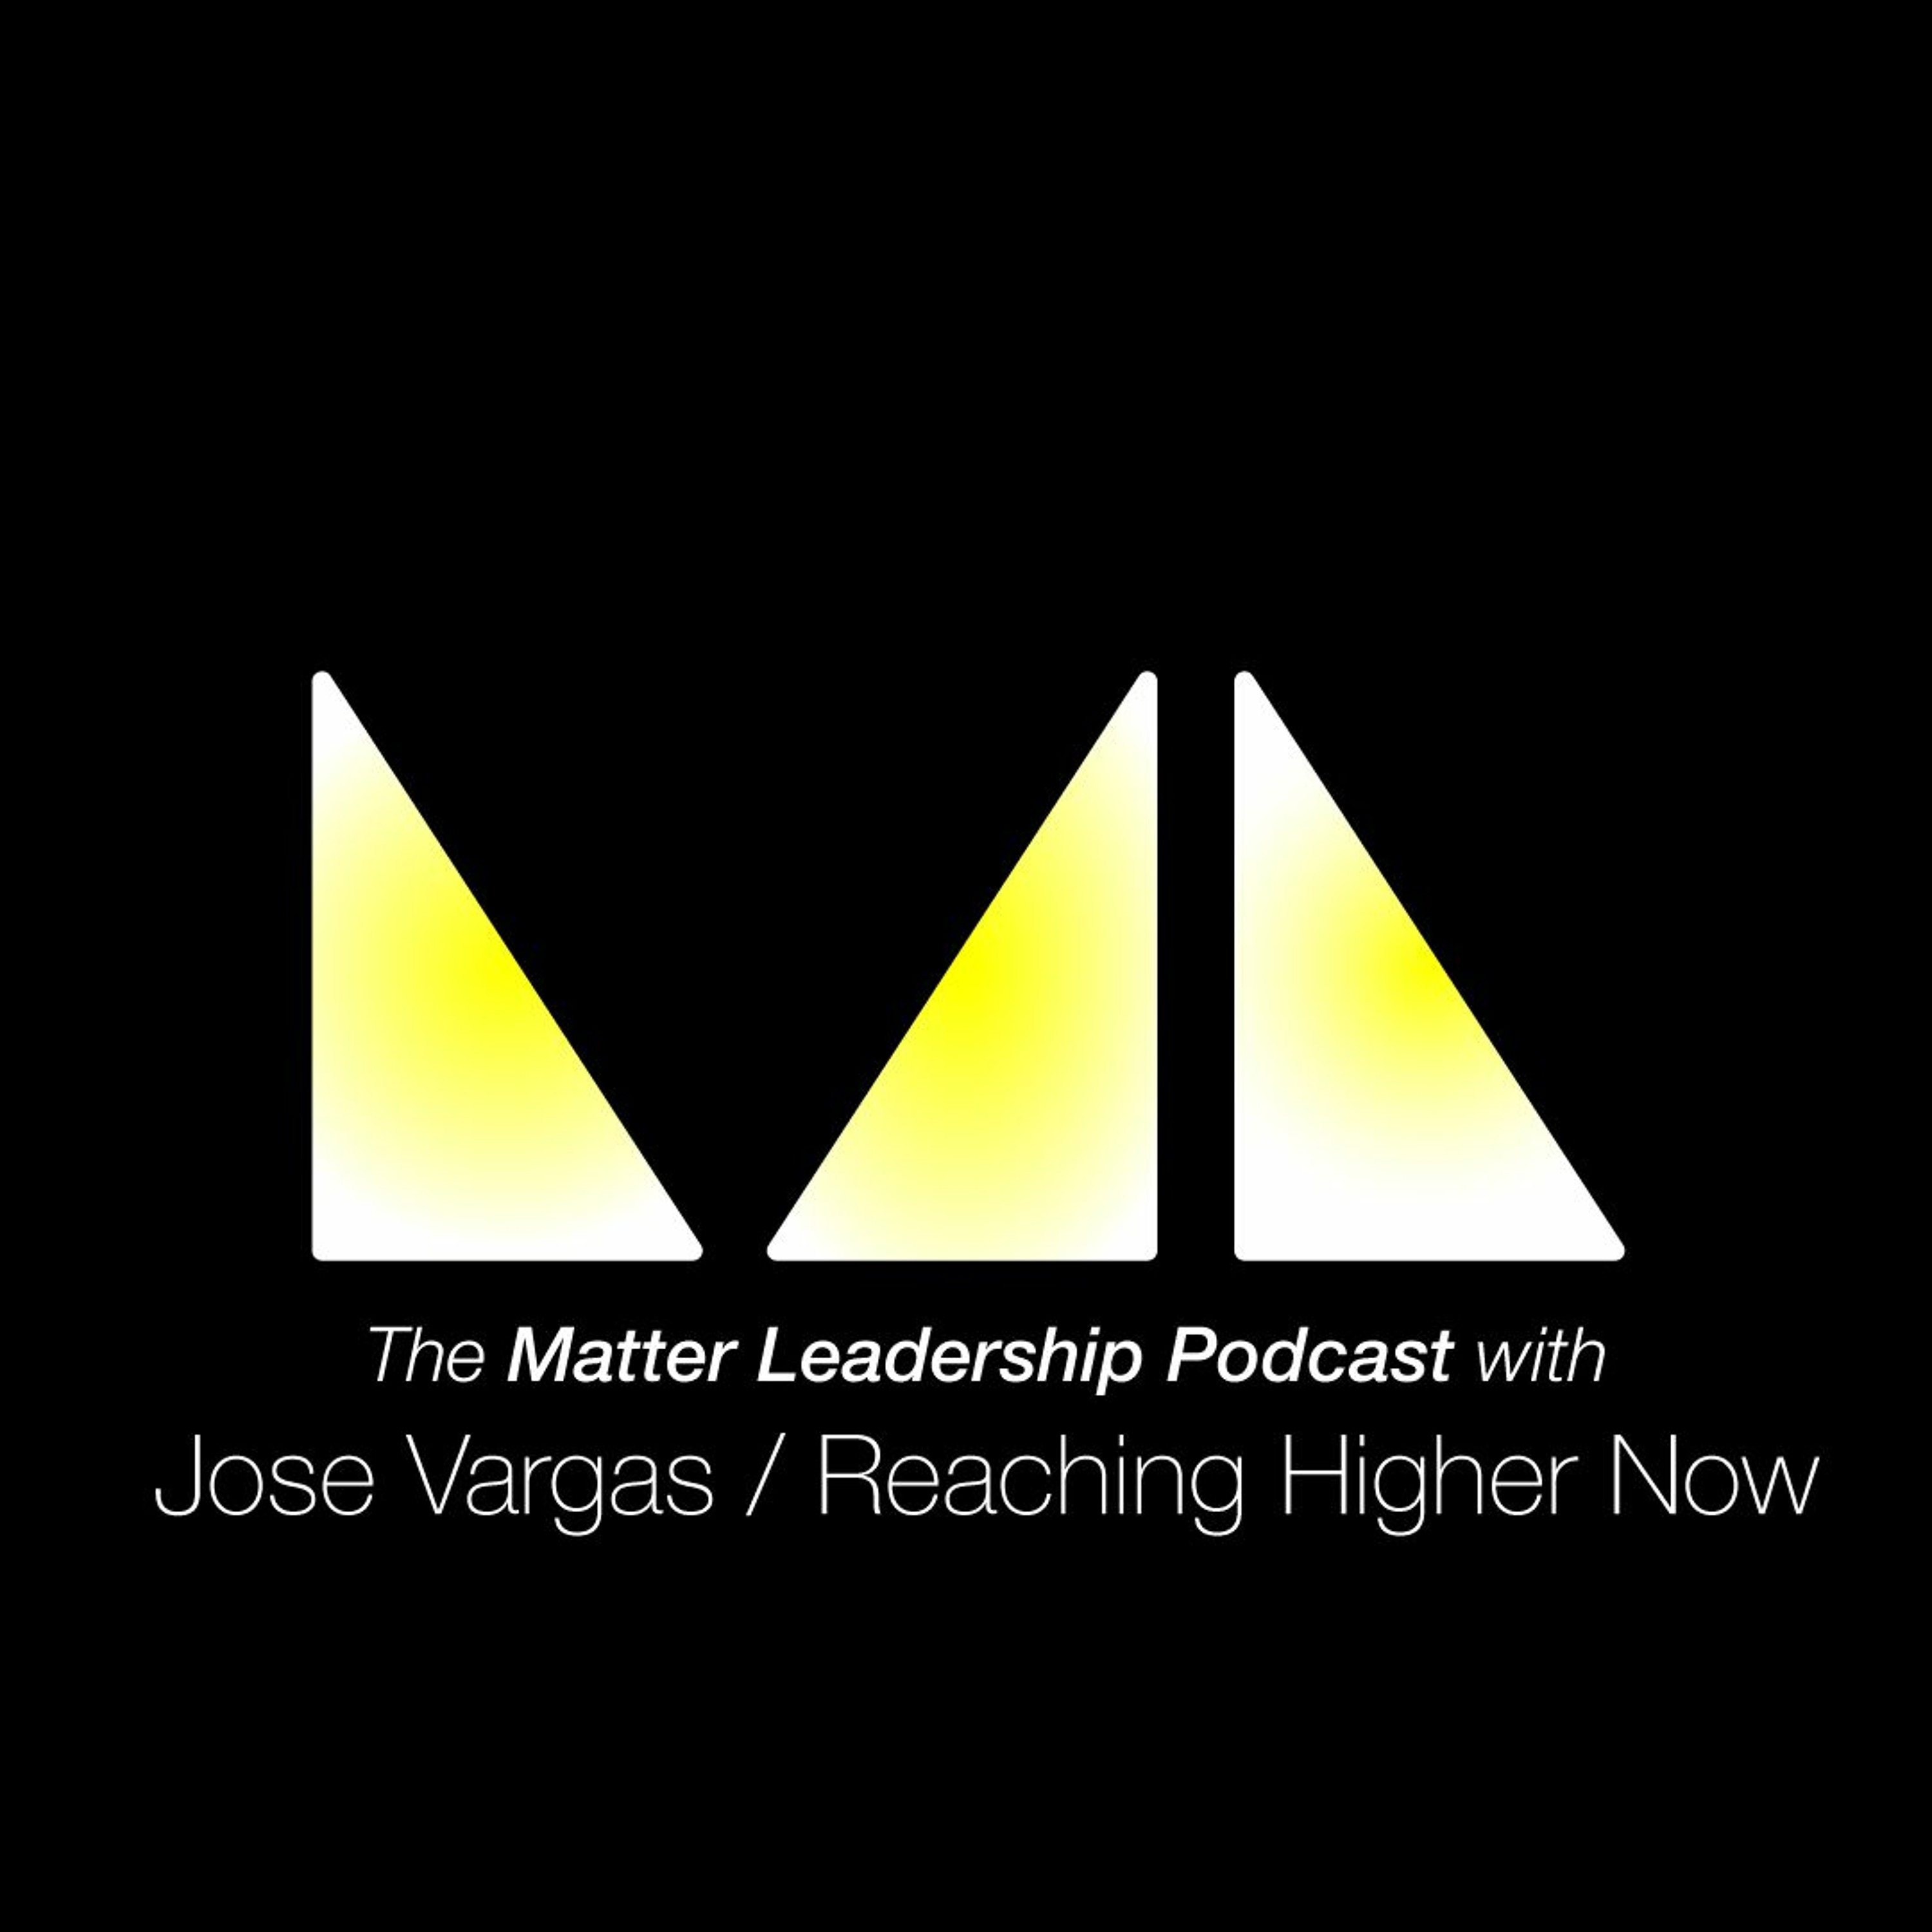 The Matter Leadership Podcast: Jose Vargas / Reaching Higher Now